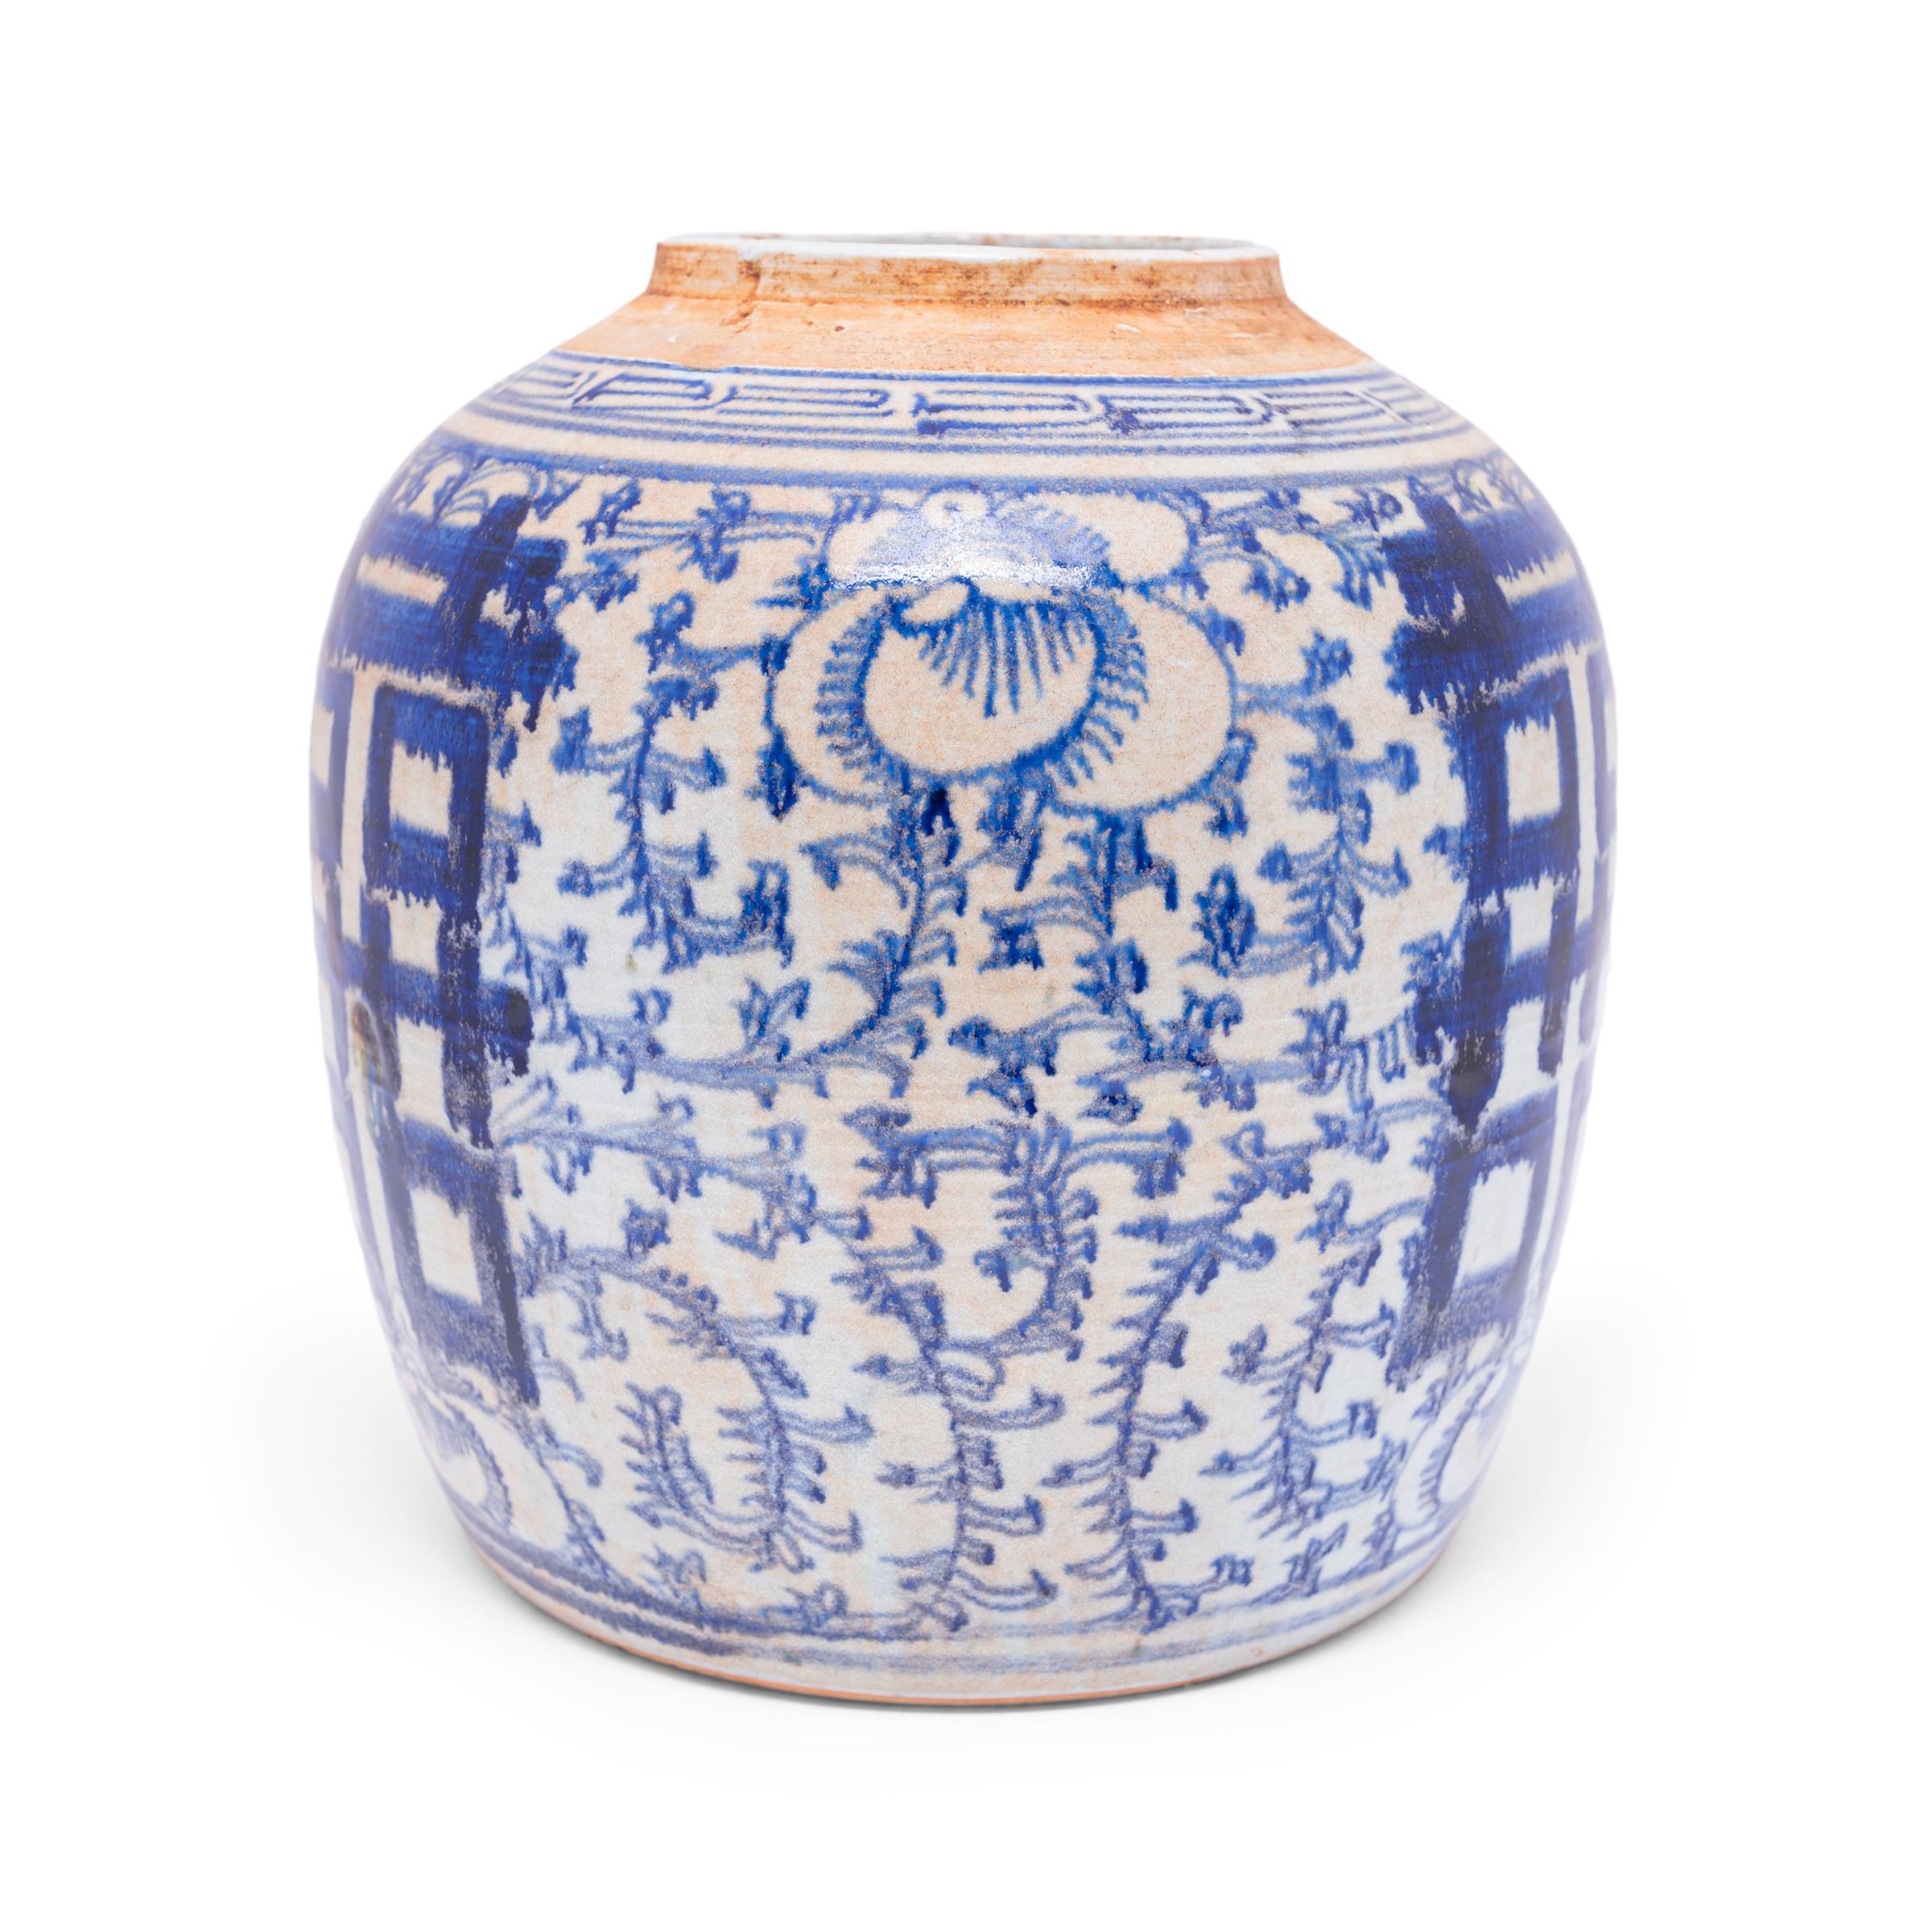 Glazed in the classic blue-and-white manner, this rounded jar offers a blessing of happiness and good fortune. Painted on either side of the jar is the ? symbol for 